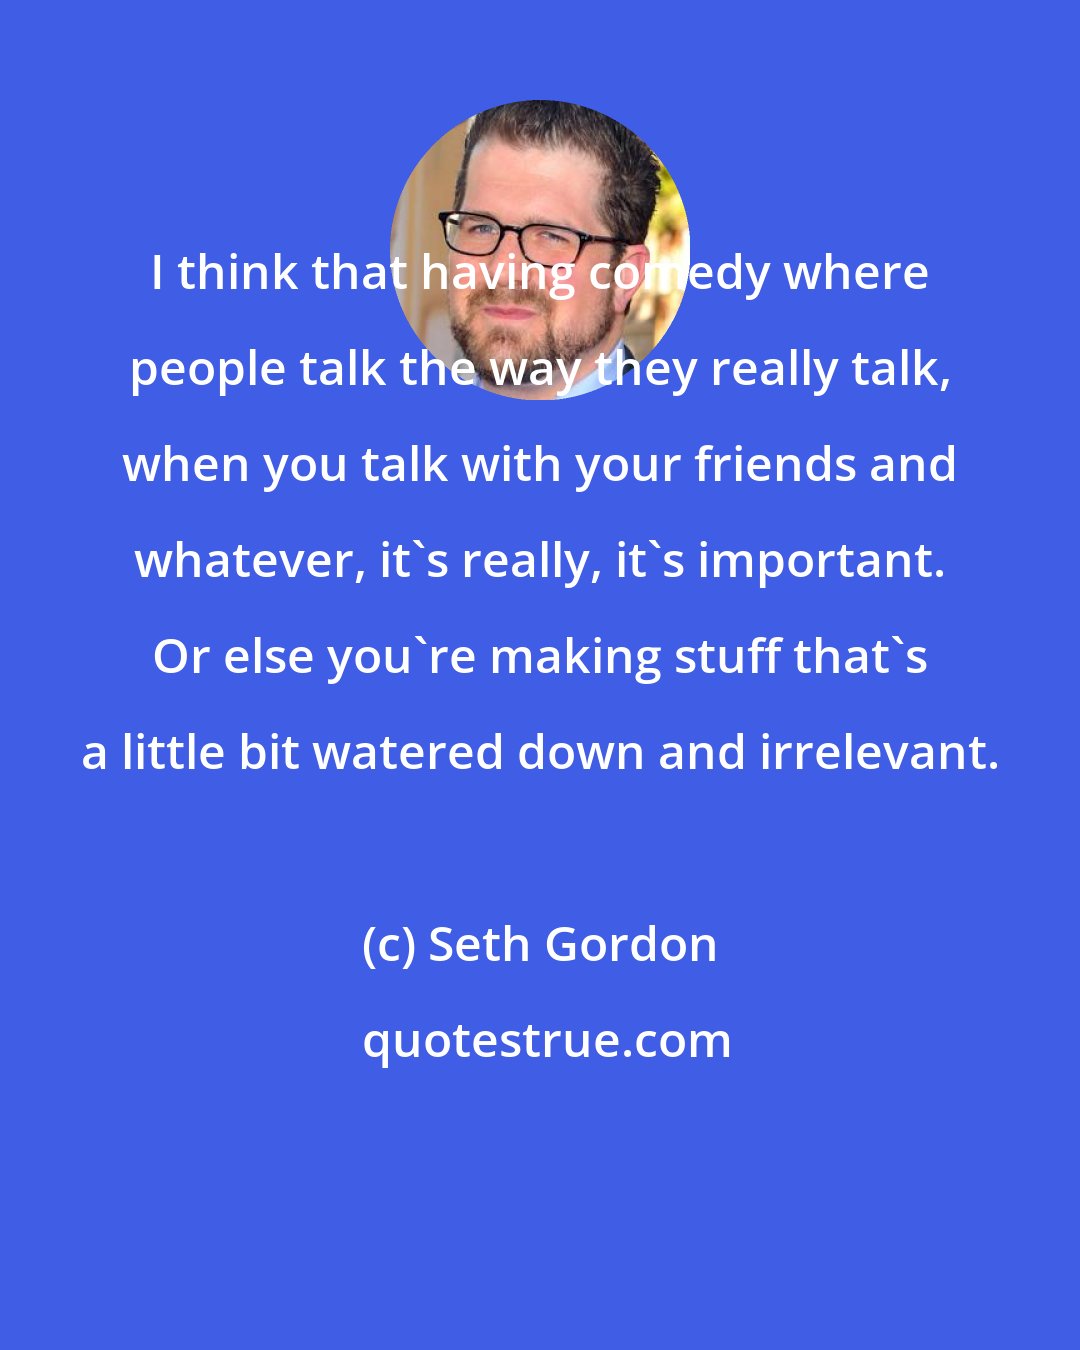 Seth Gordon: I think that having comedy where people talk the way they really talk, when you talk with your friends and whatever, it's really, it's important. Or else you're making stuff that's a little bit watered down and irrelevant.